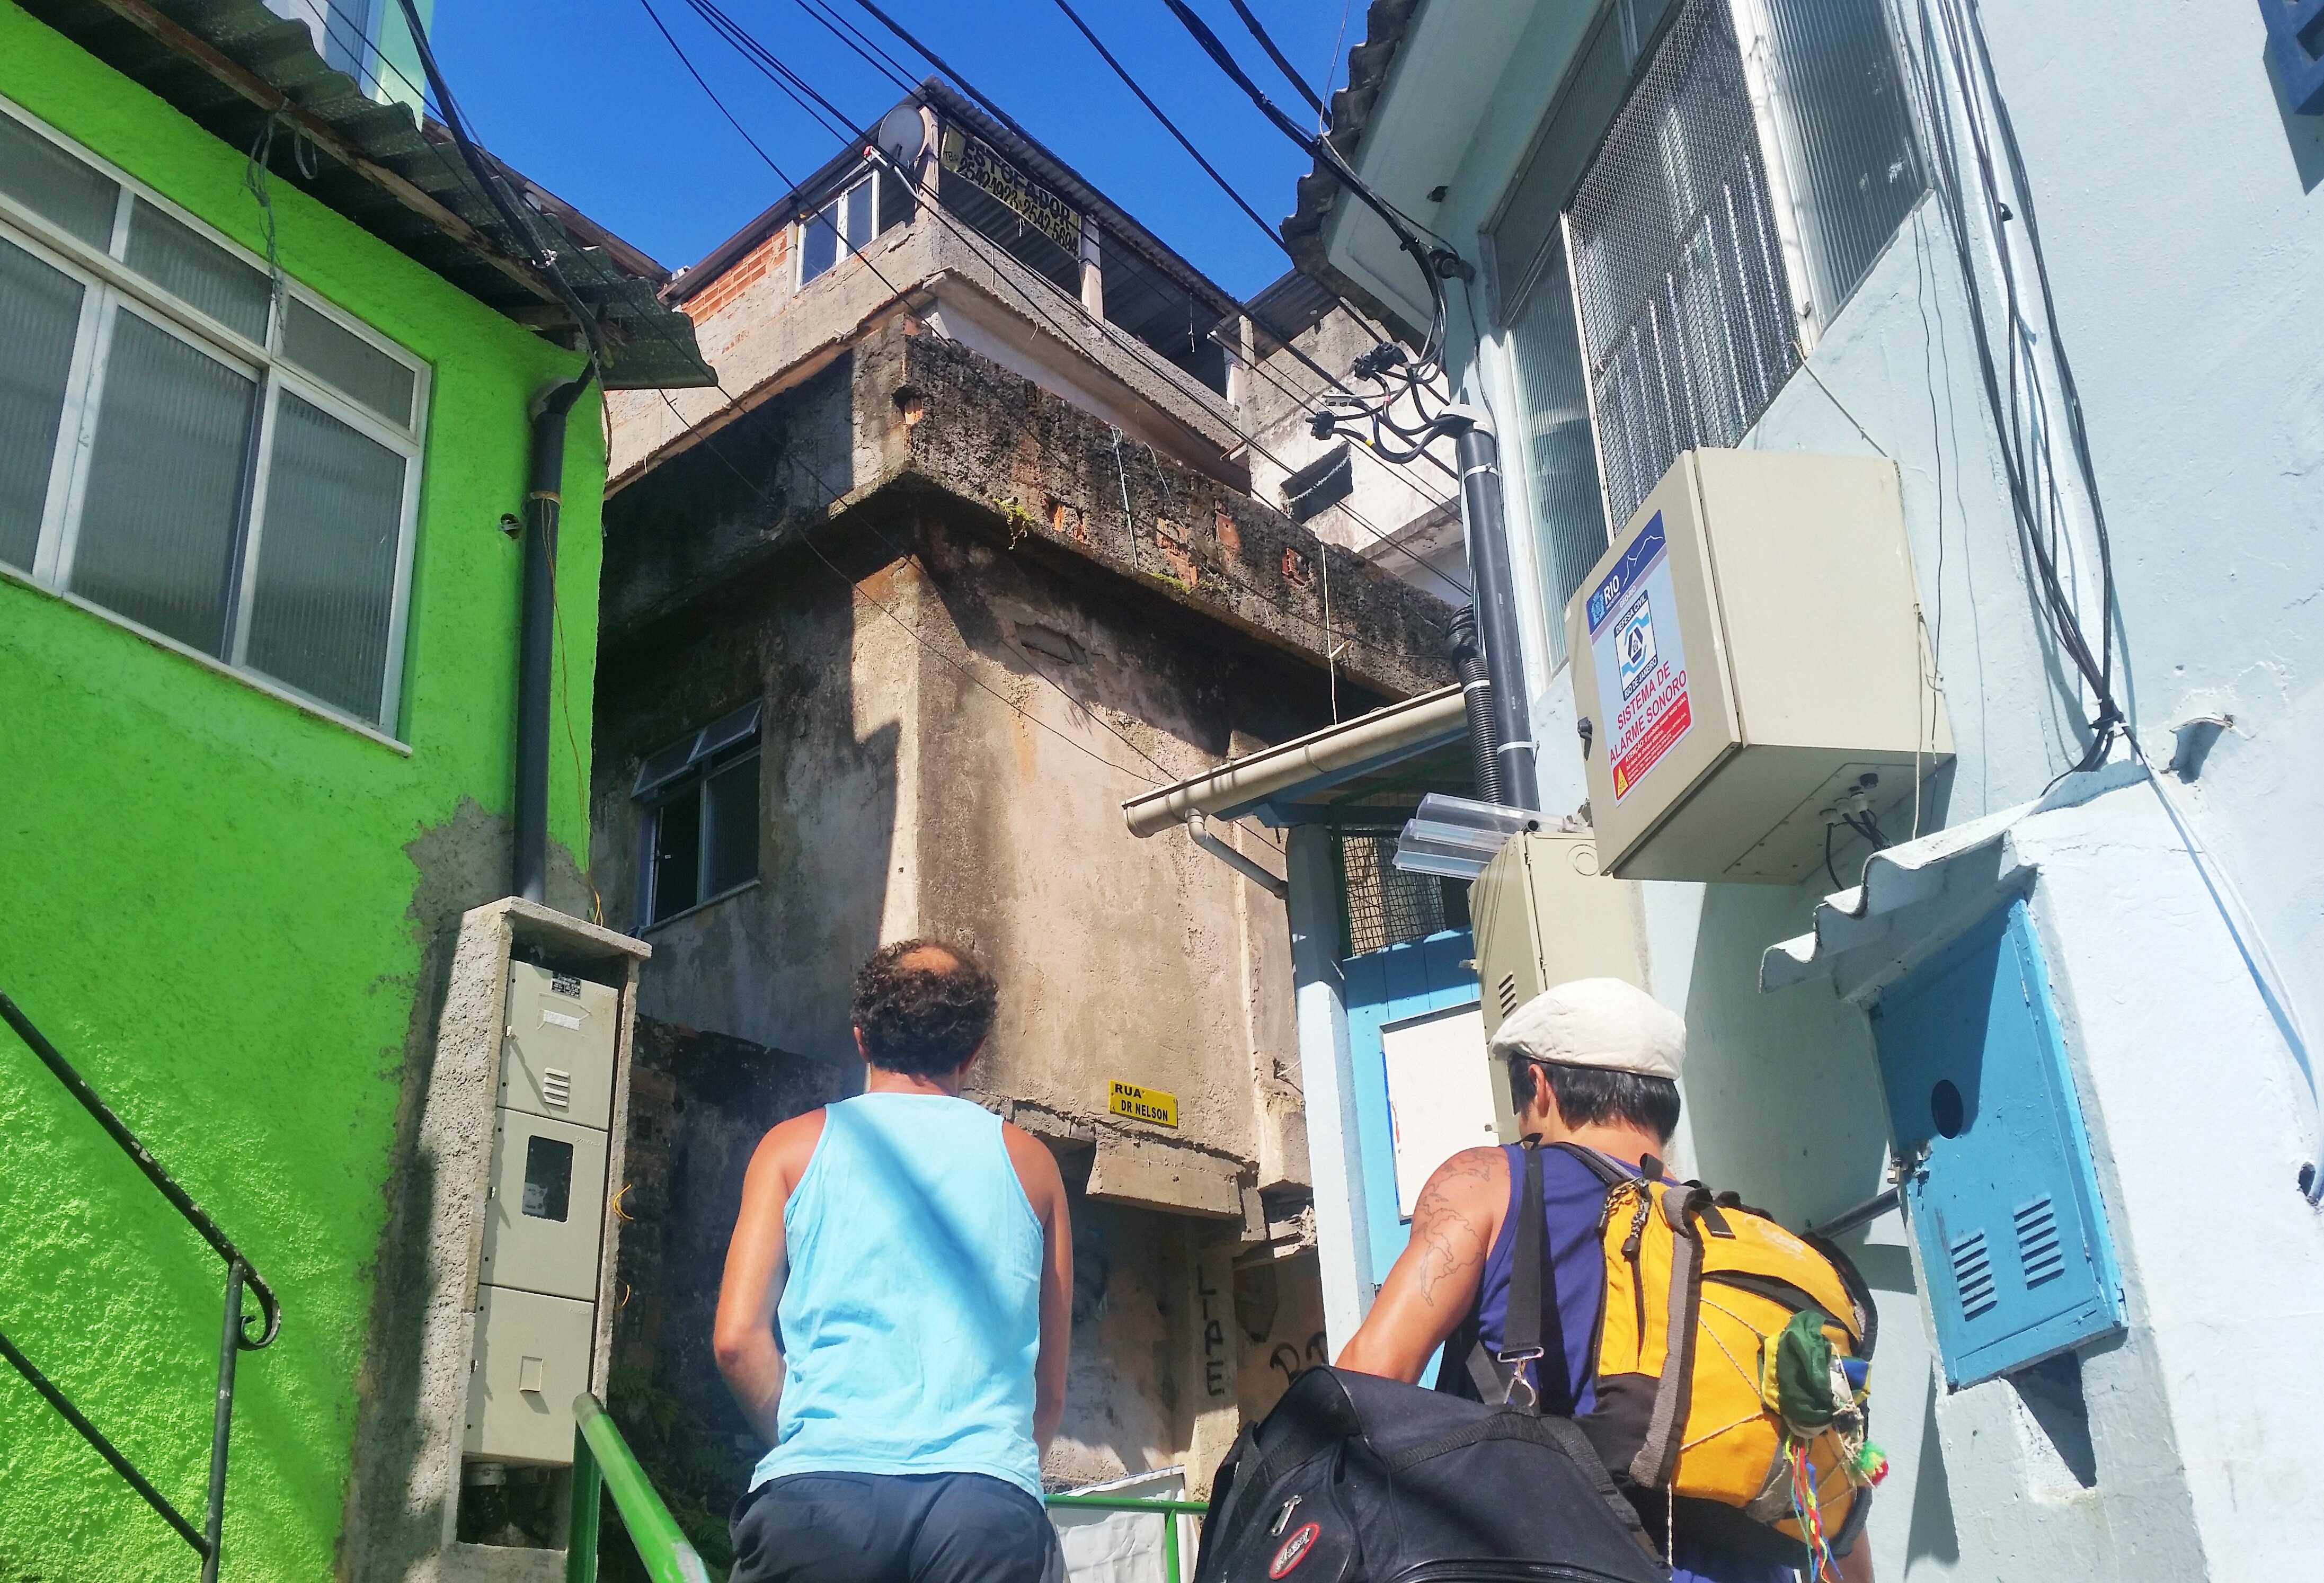 Is it safe for tourists to visit the favelas in Rio de Janeiro? - Walking to our guesthouse in Chapéu Mangueira favela in Rio de Janeiro, Brazil